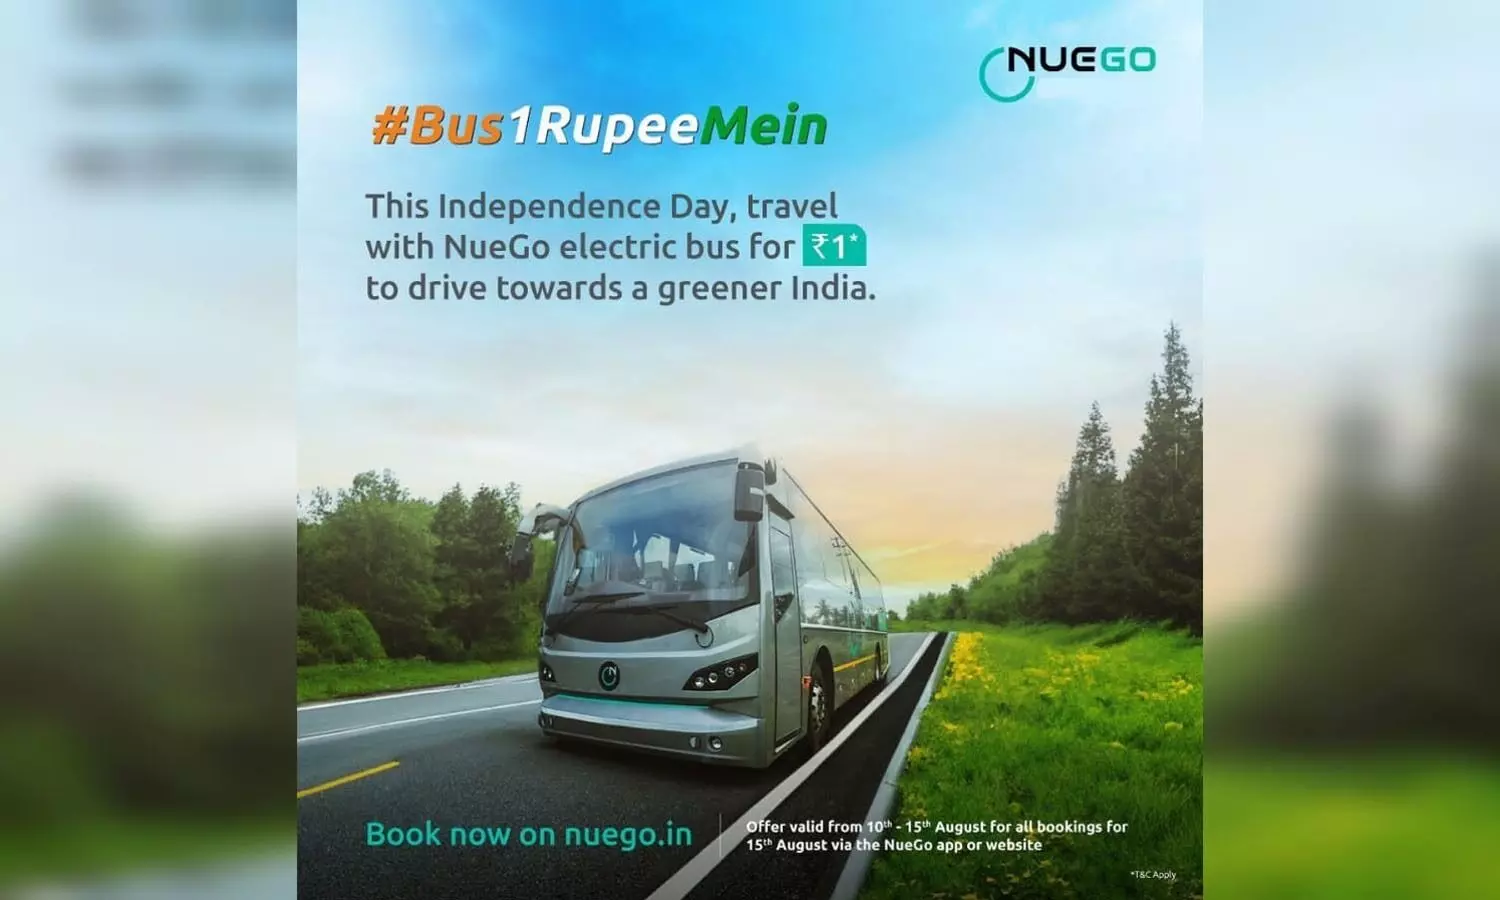 NueGo launches Independence Day special campaign, offering all tickets for August 15 for just ₹1